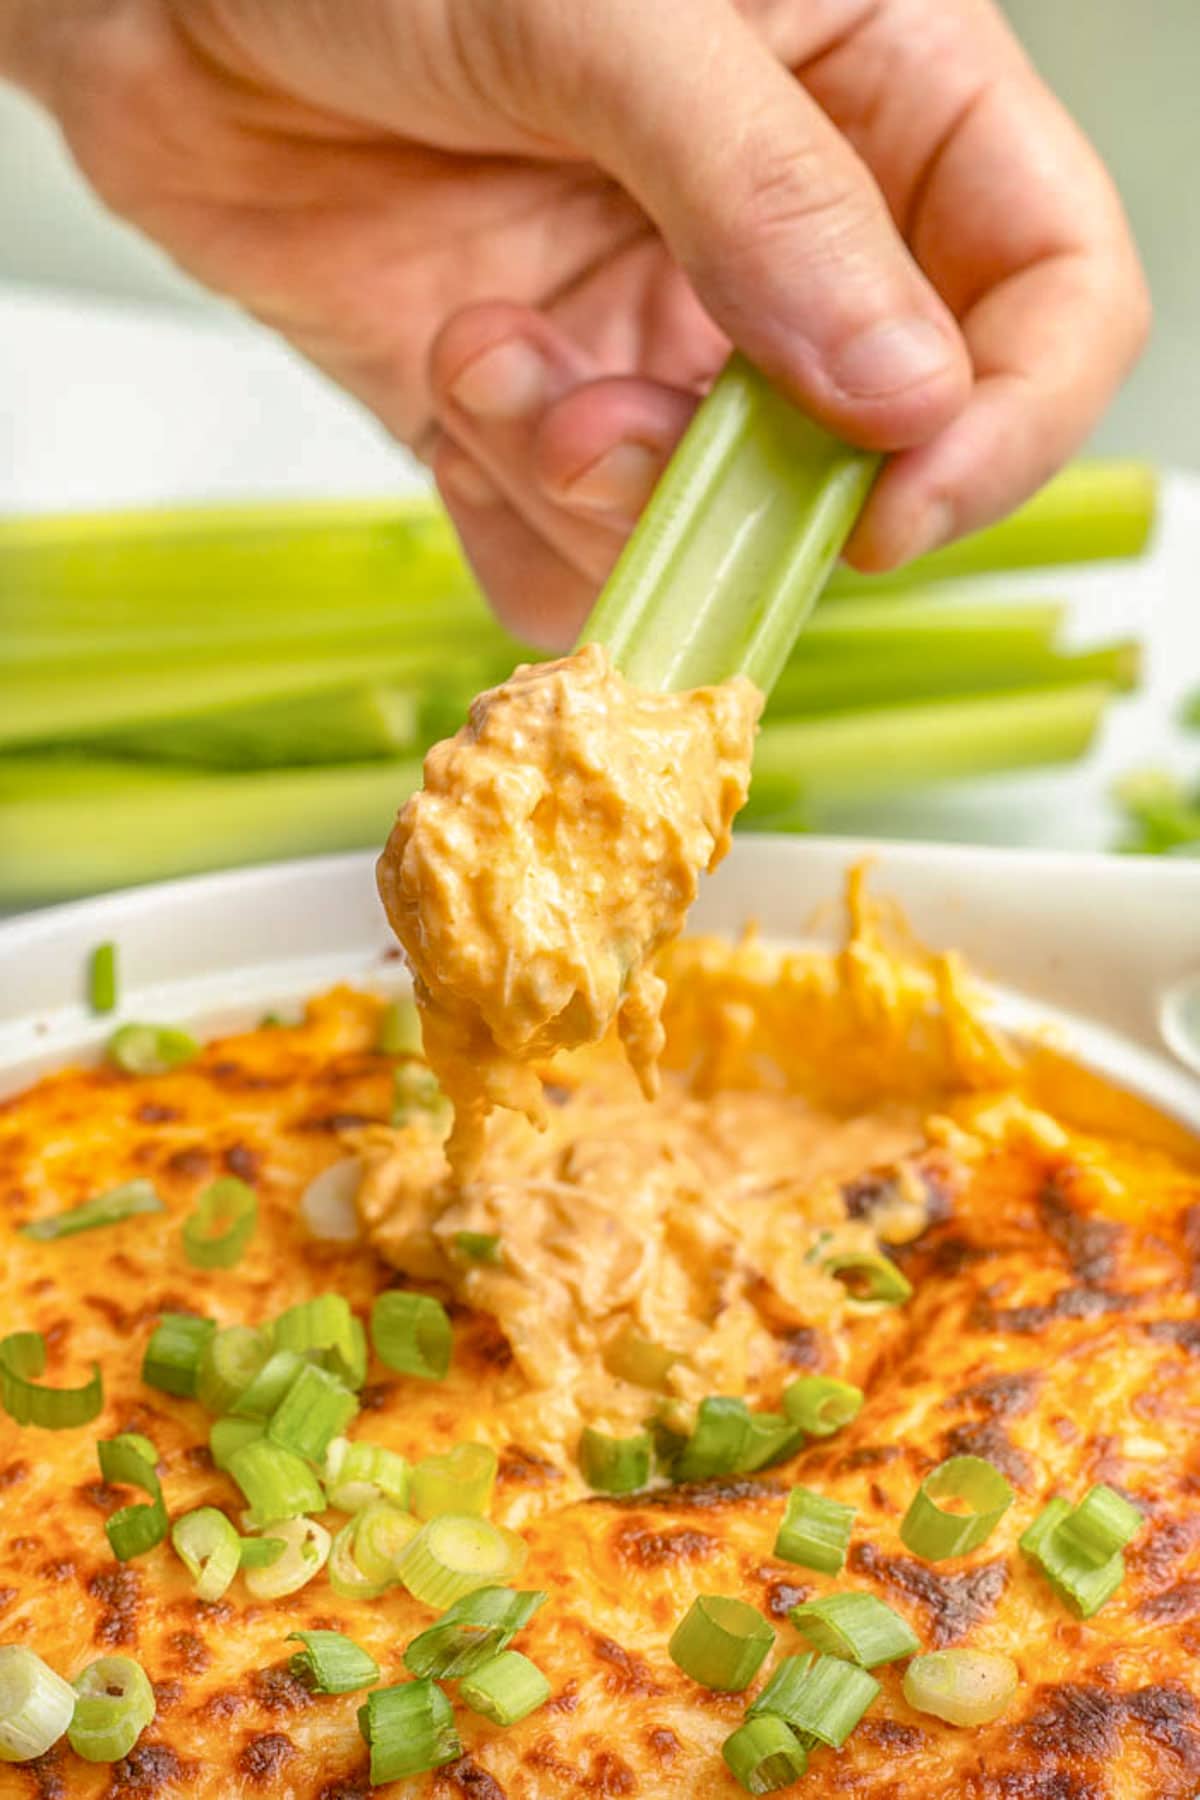 A white woman's hand holding a celery stick used to scoop keto buffalo chicken dip out of a bowl.